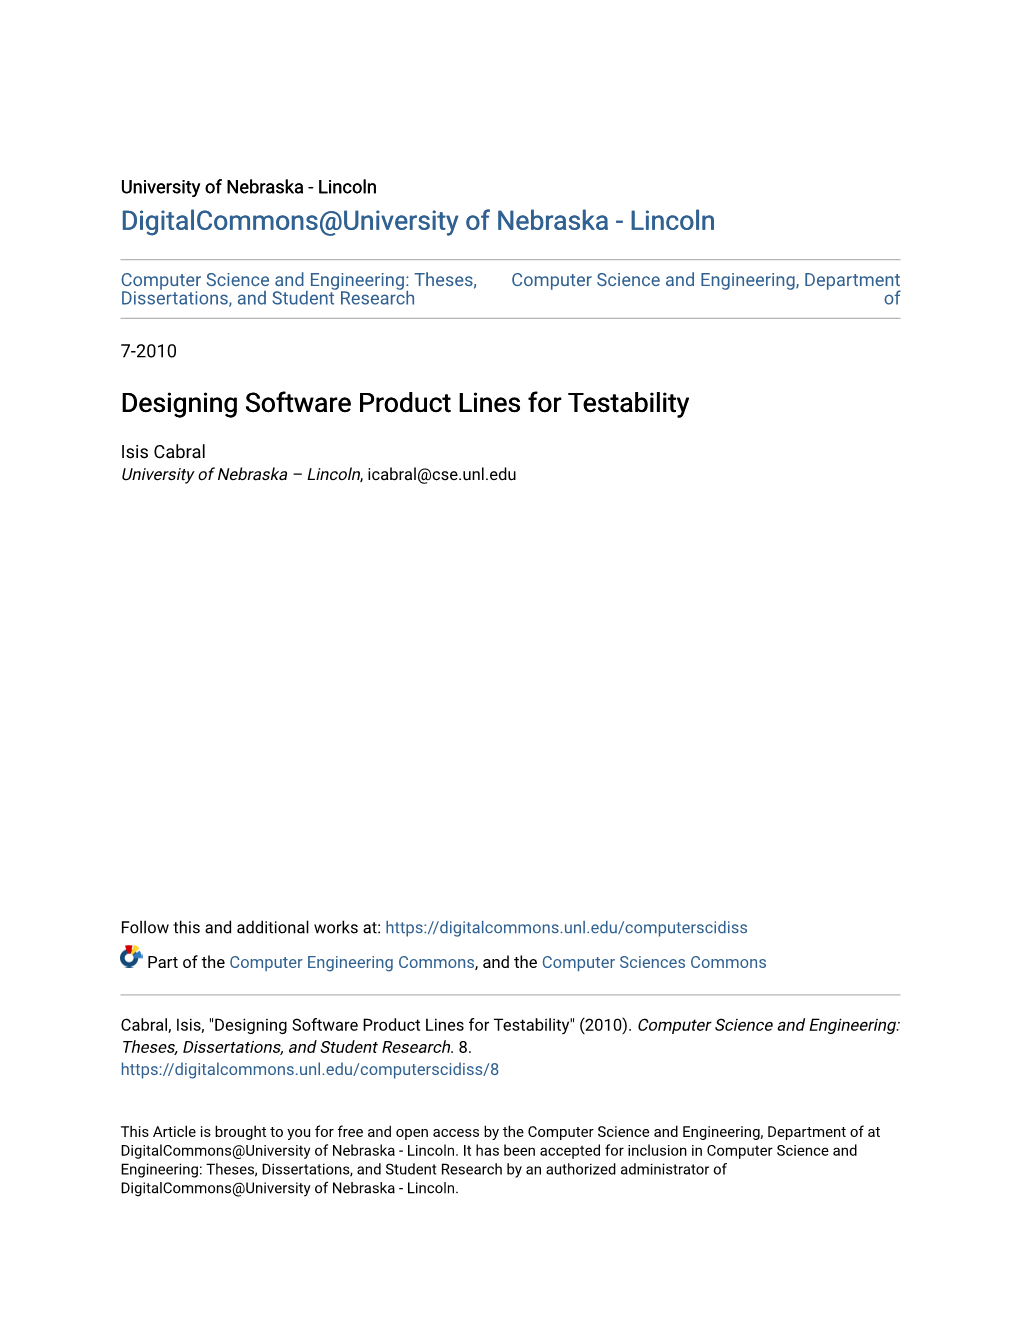 Designing Software Product Lines for Testability